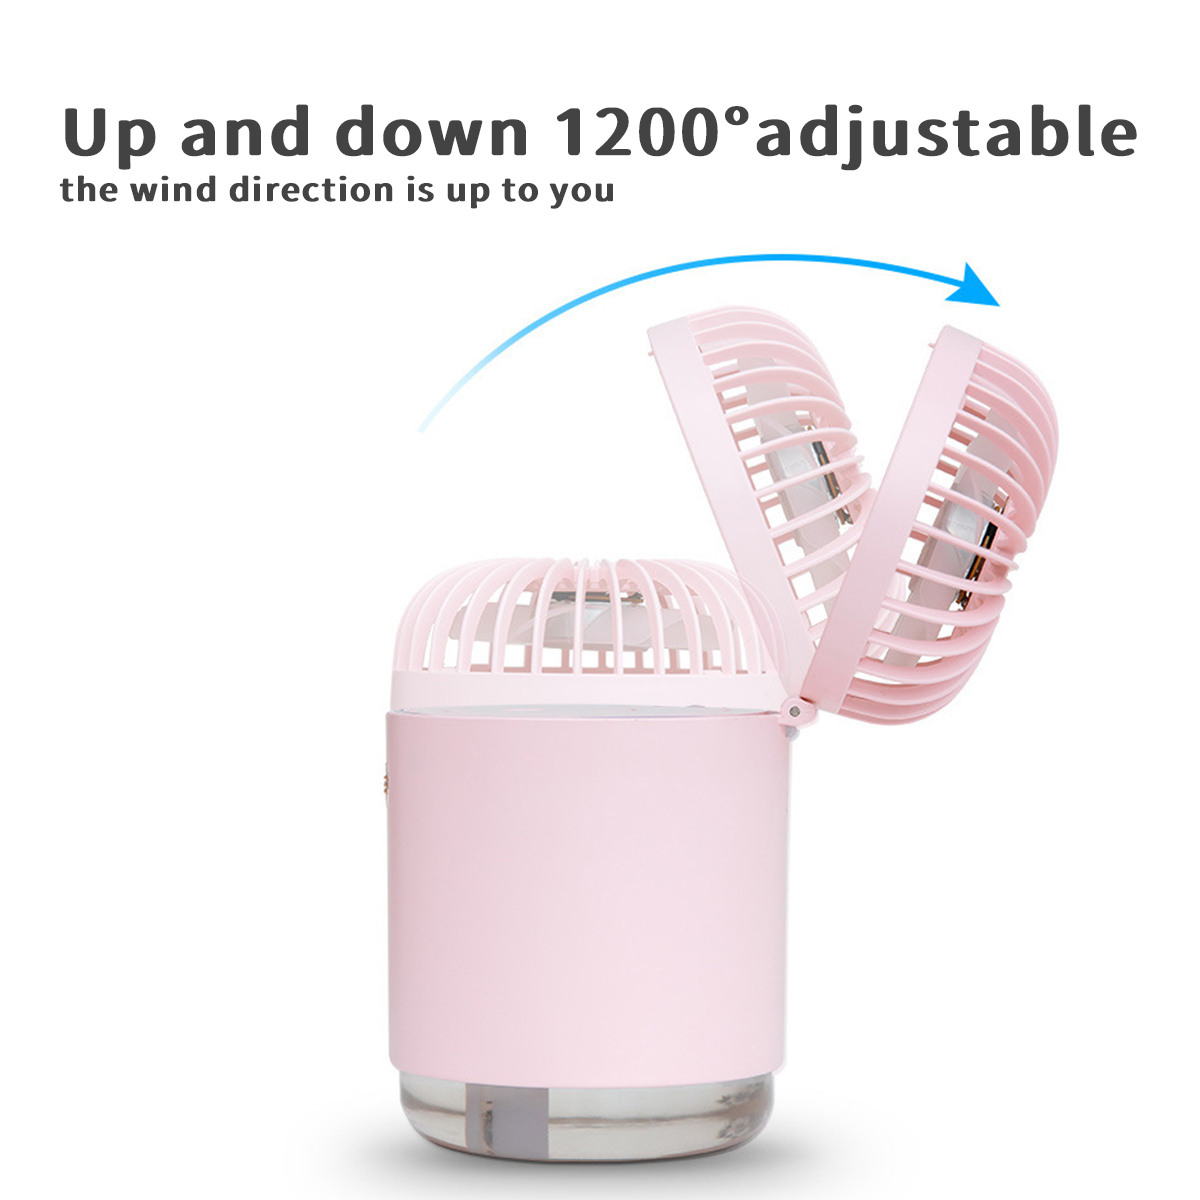 Multifunctional-2000mAh-Mini-USB-Rechargeable-Fan-Cooler-Desktop-Spray-Humidification-with-Colorful--1864518-4